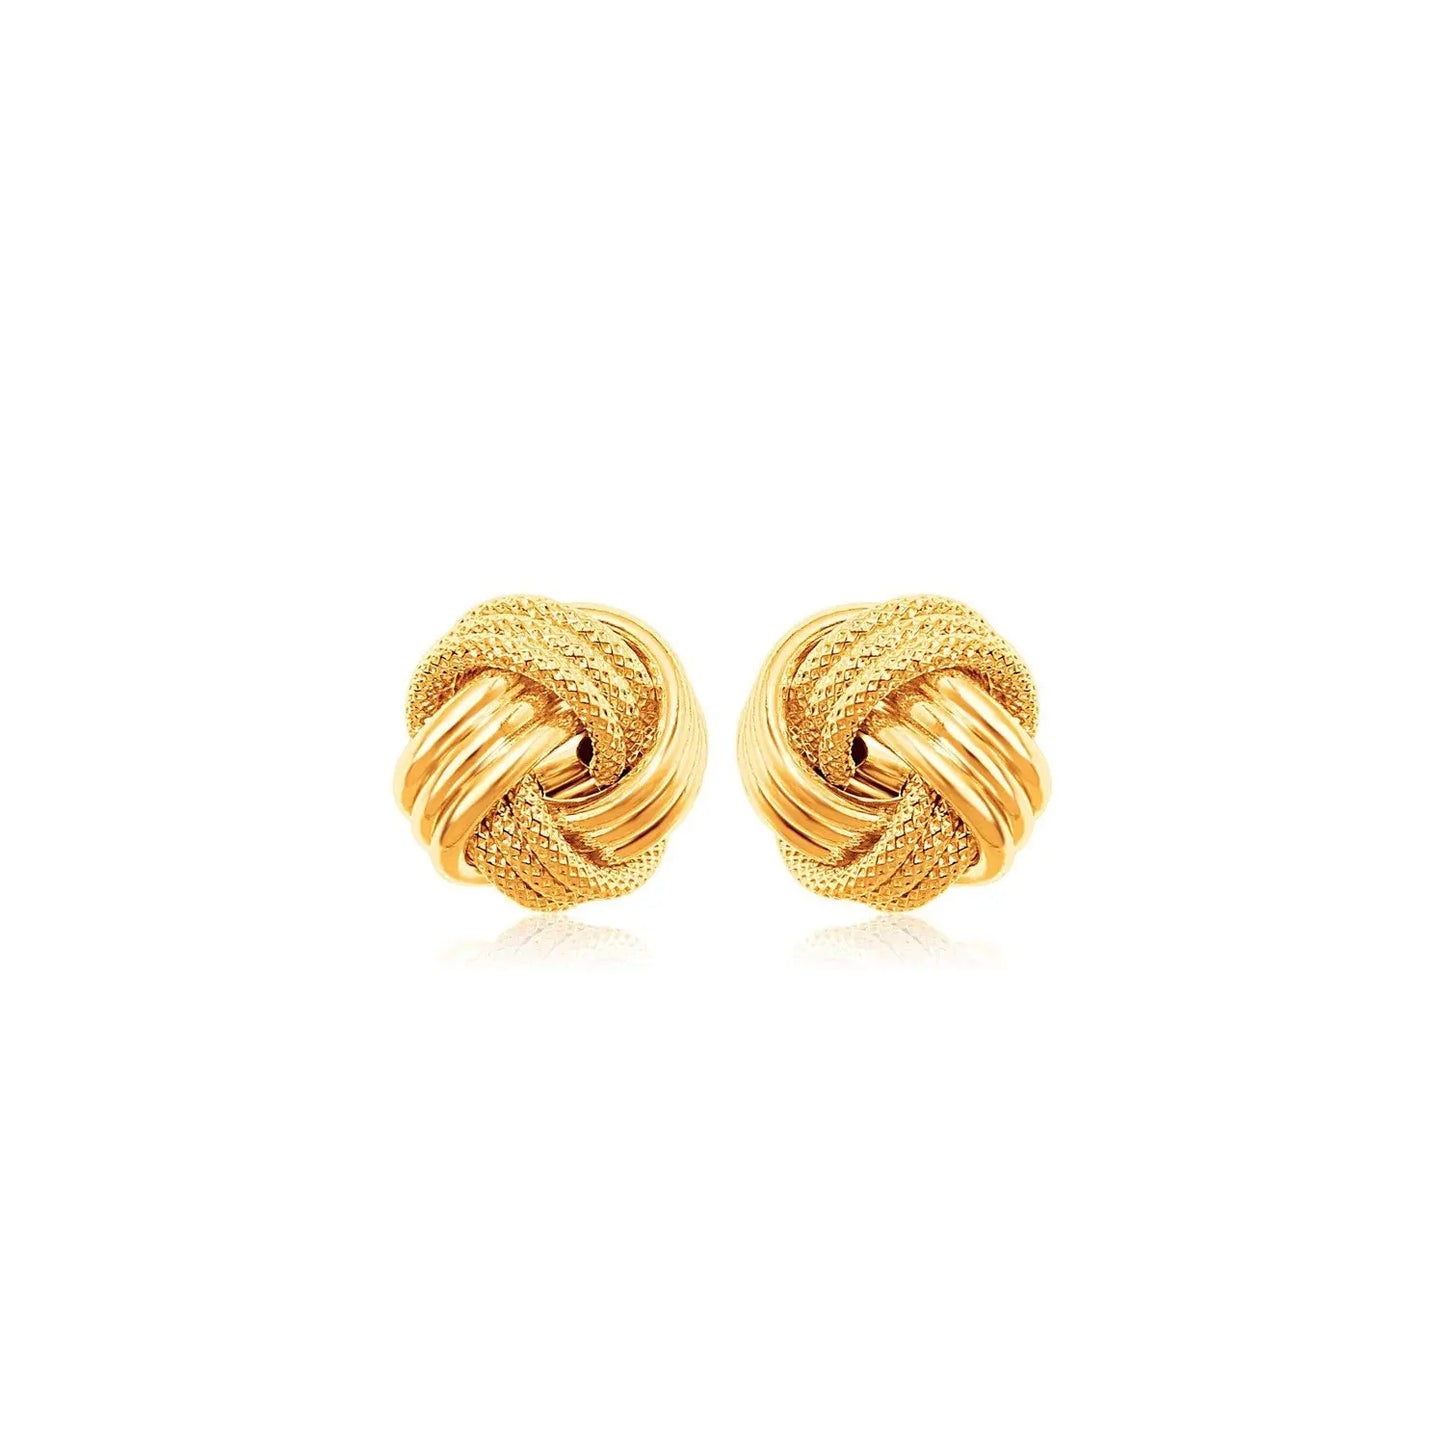 10k Yellow Gold Love Knot with Ridge Texture Earrings 